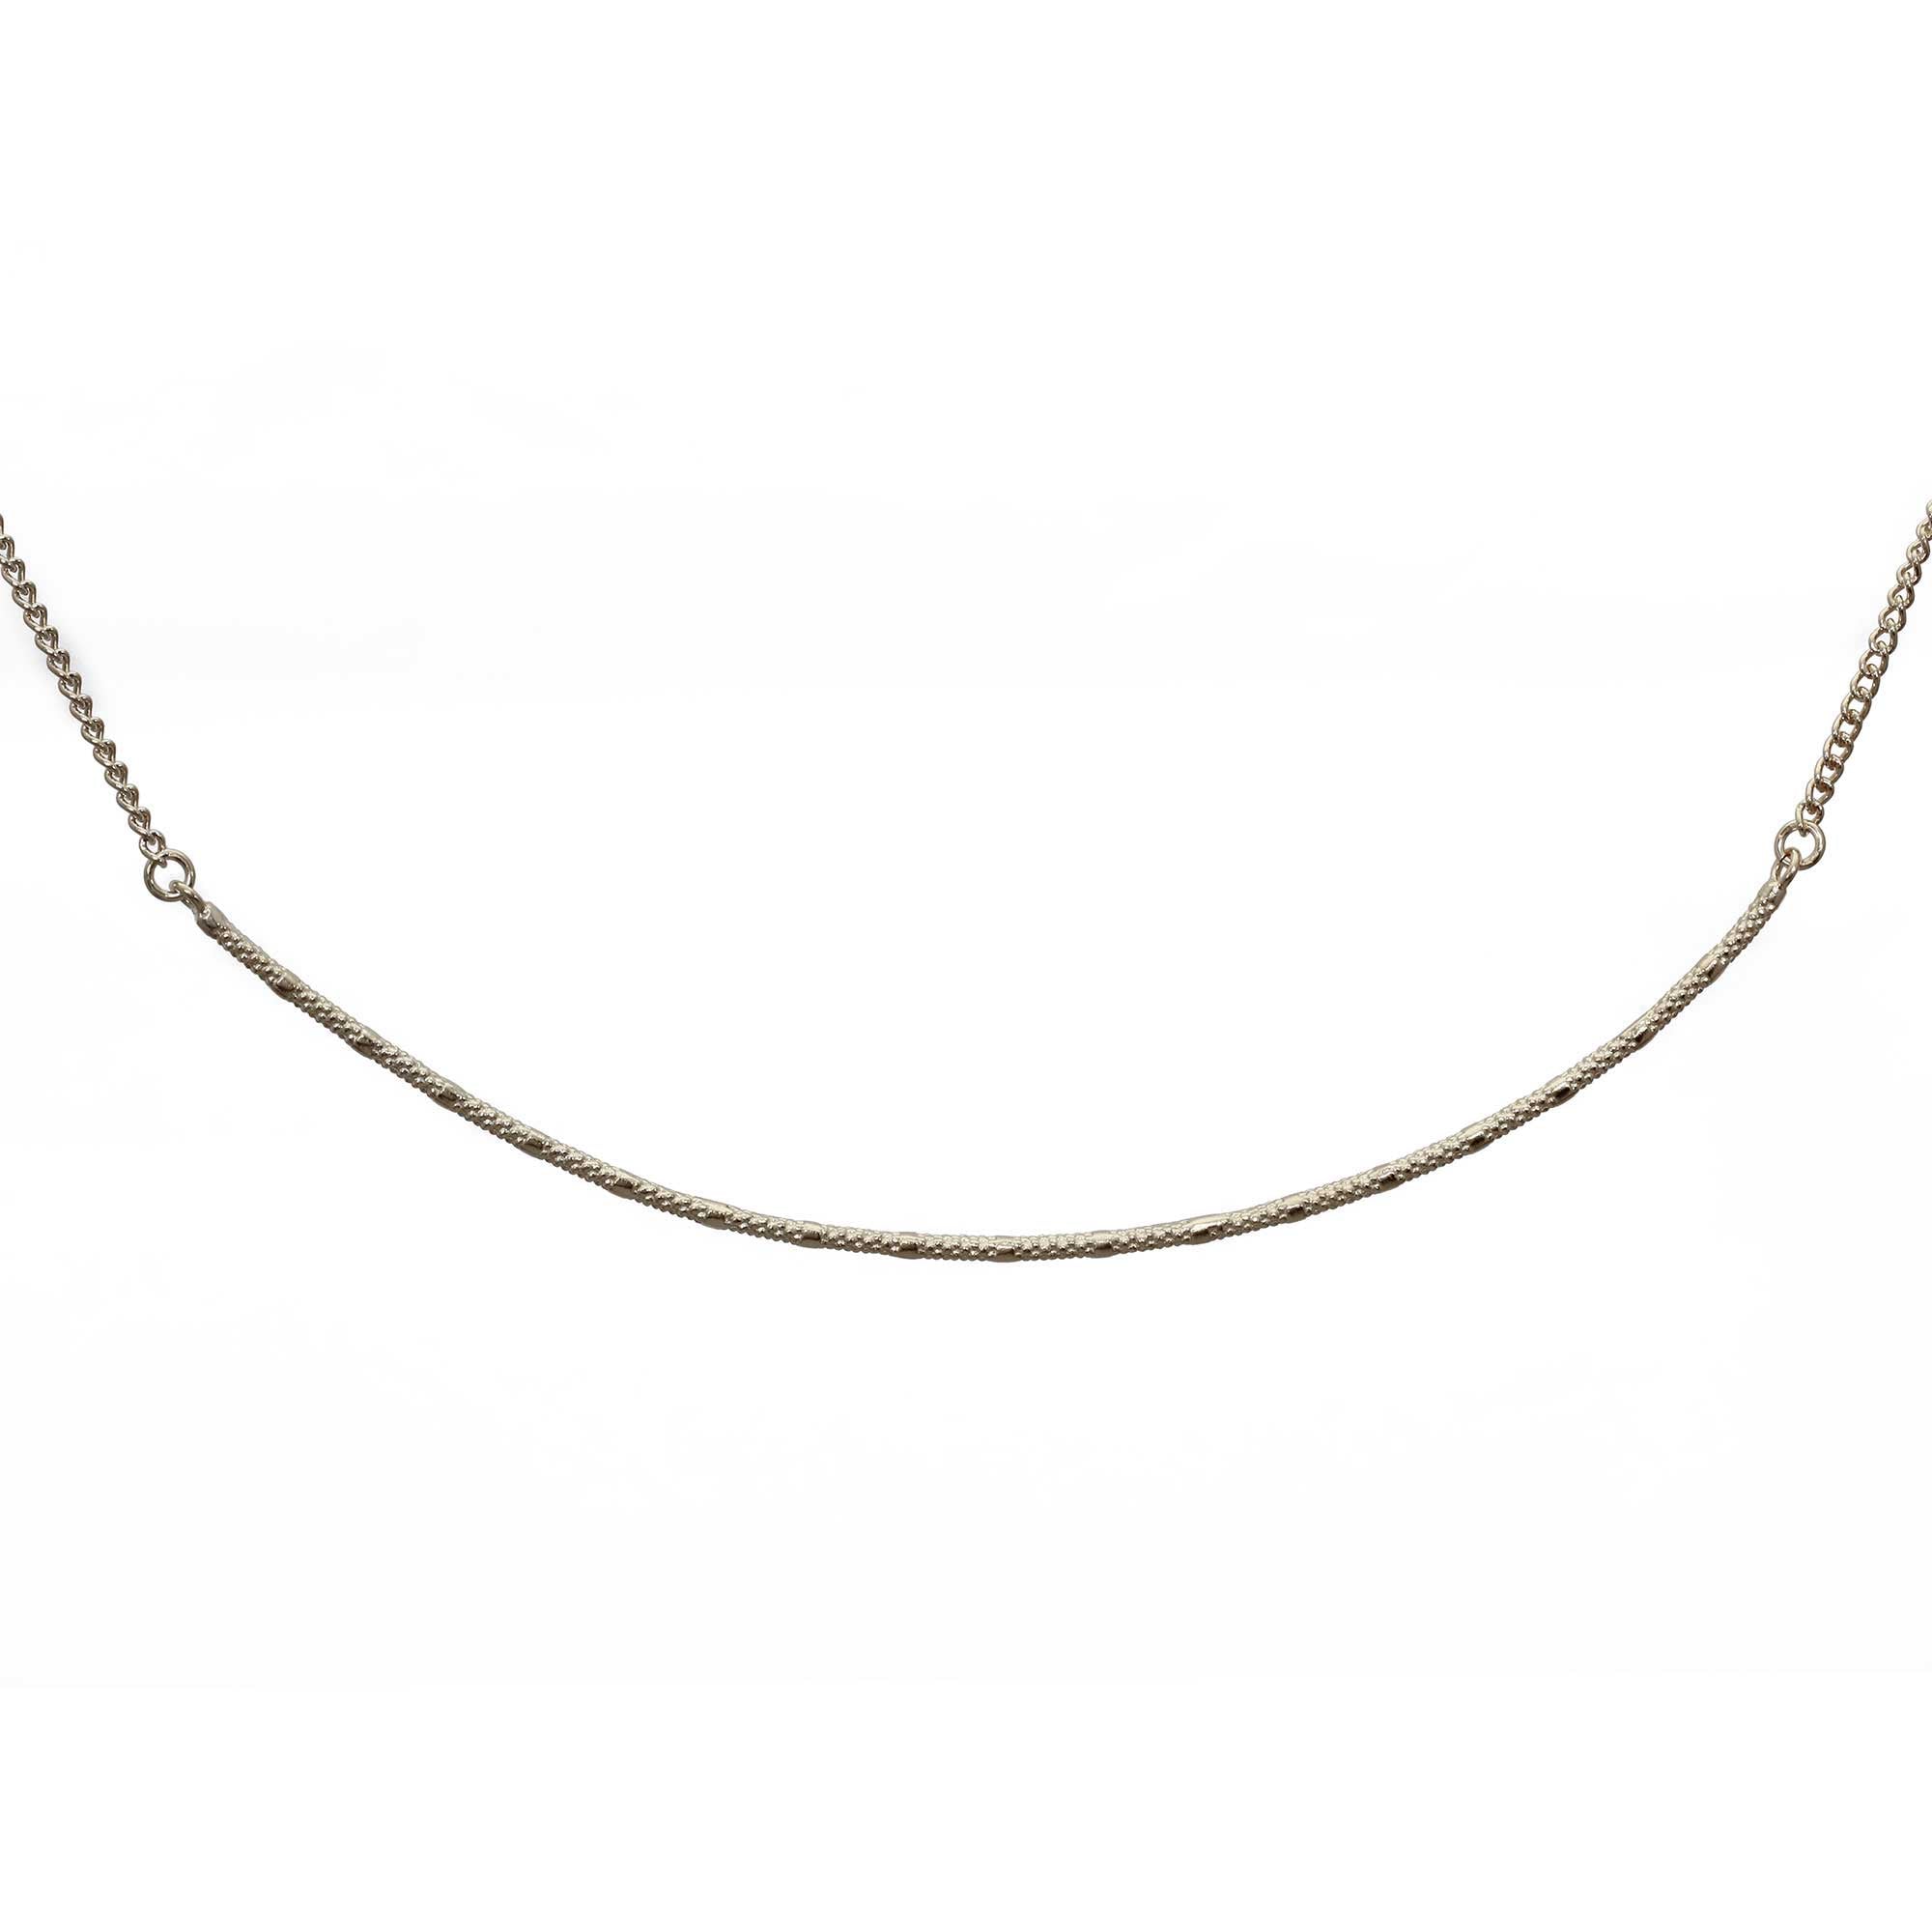 Fracture textured Sterling Silver Choker Necklace